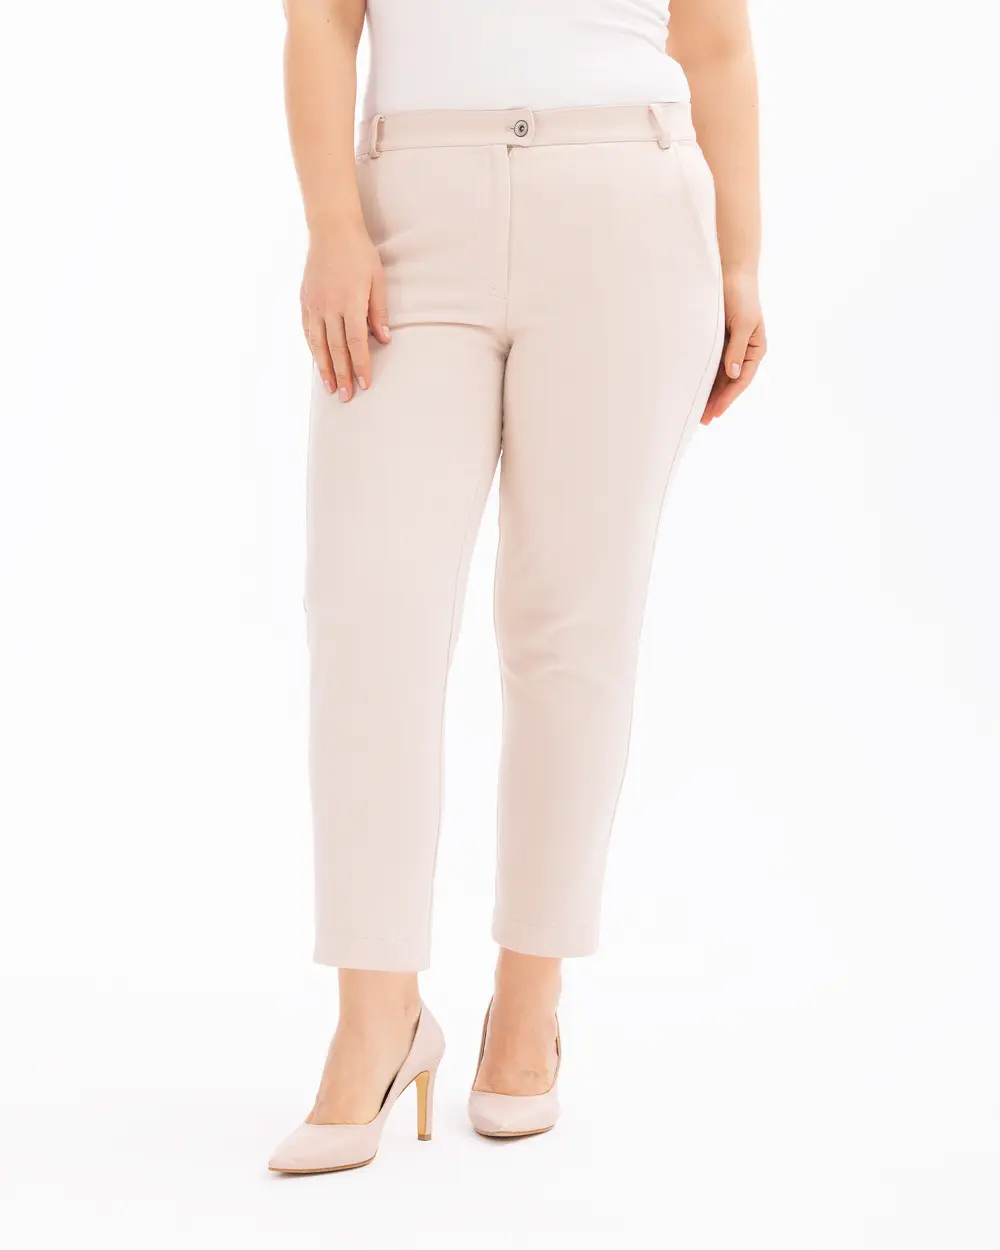 Plus Size Ankle Length Mom Fit Pants